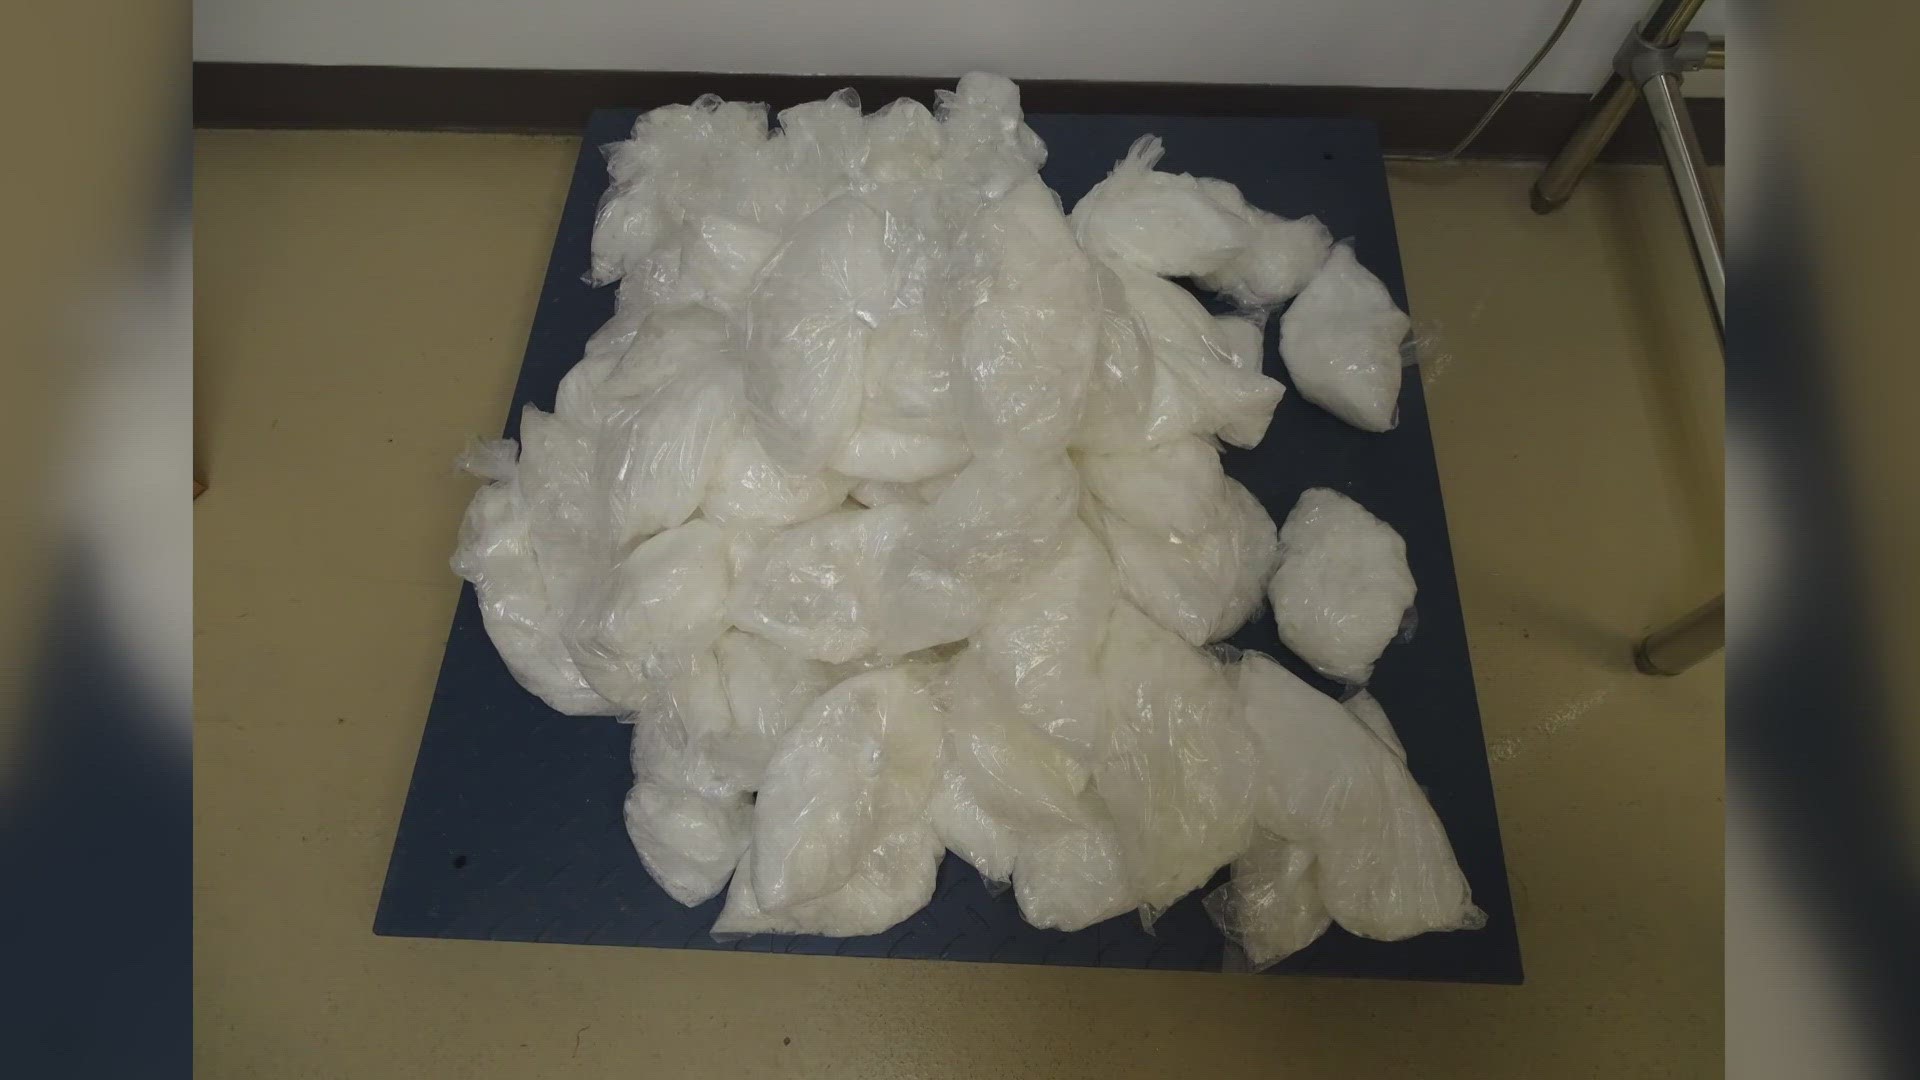 Investigators in Jefferson County say they've seized 5-million-dollars worth of drugs - with enough fentanyl to kill hundreds of thousands of people.